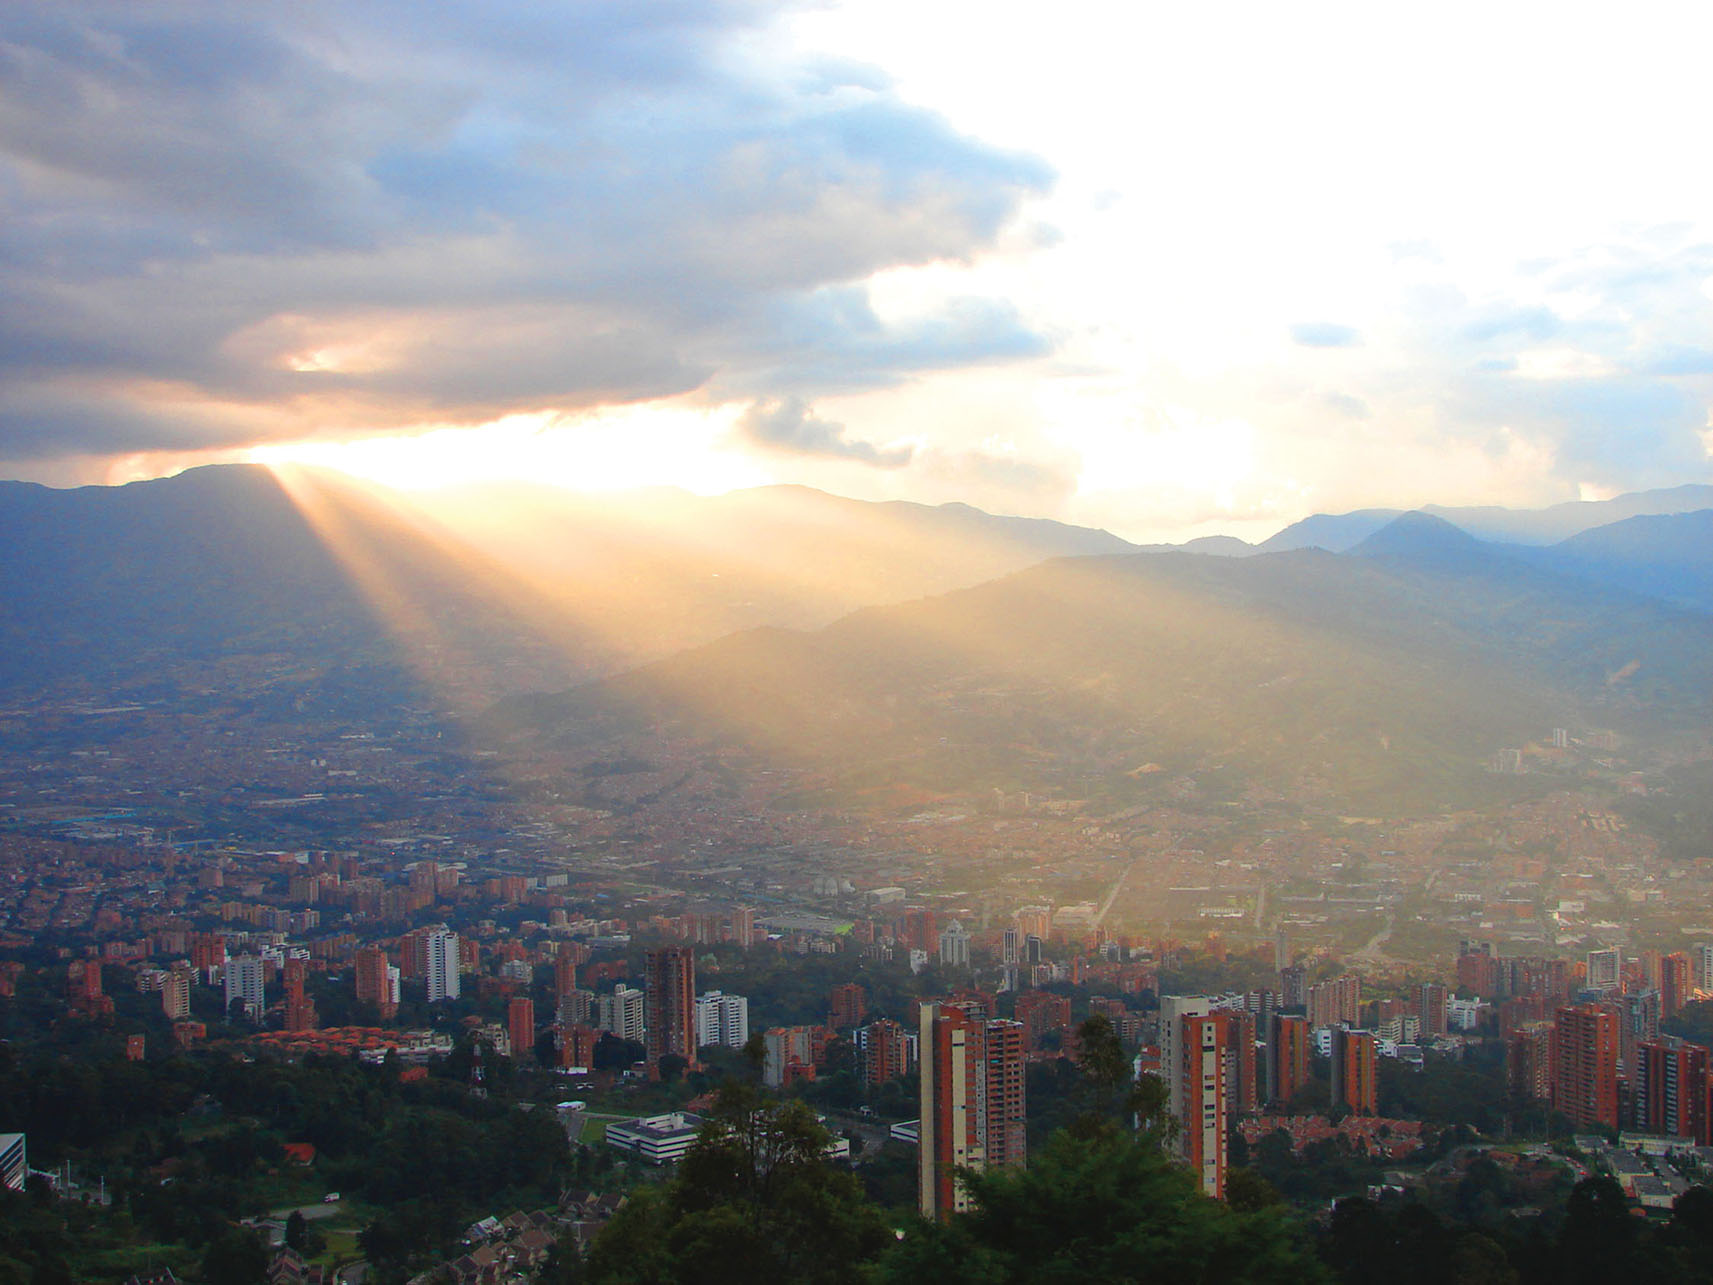 Beams of light illuminate the city as the sun breaks through the clouds over Medellín, Colombia. (Photo by Iván Jere Jota.)